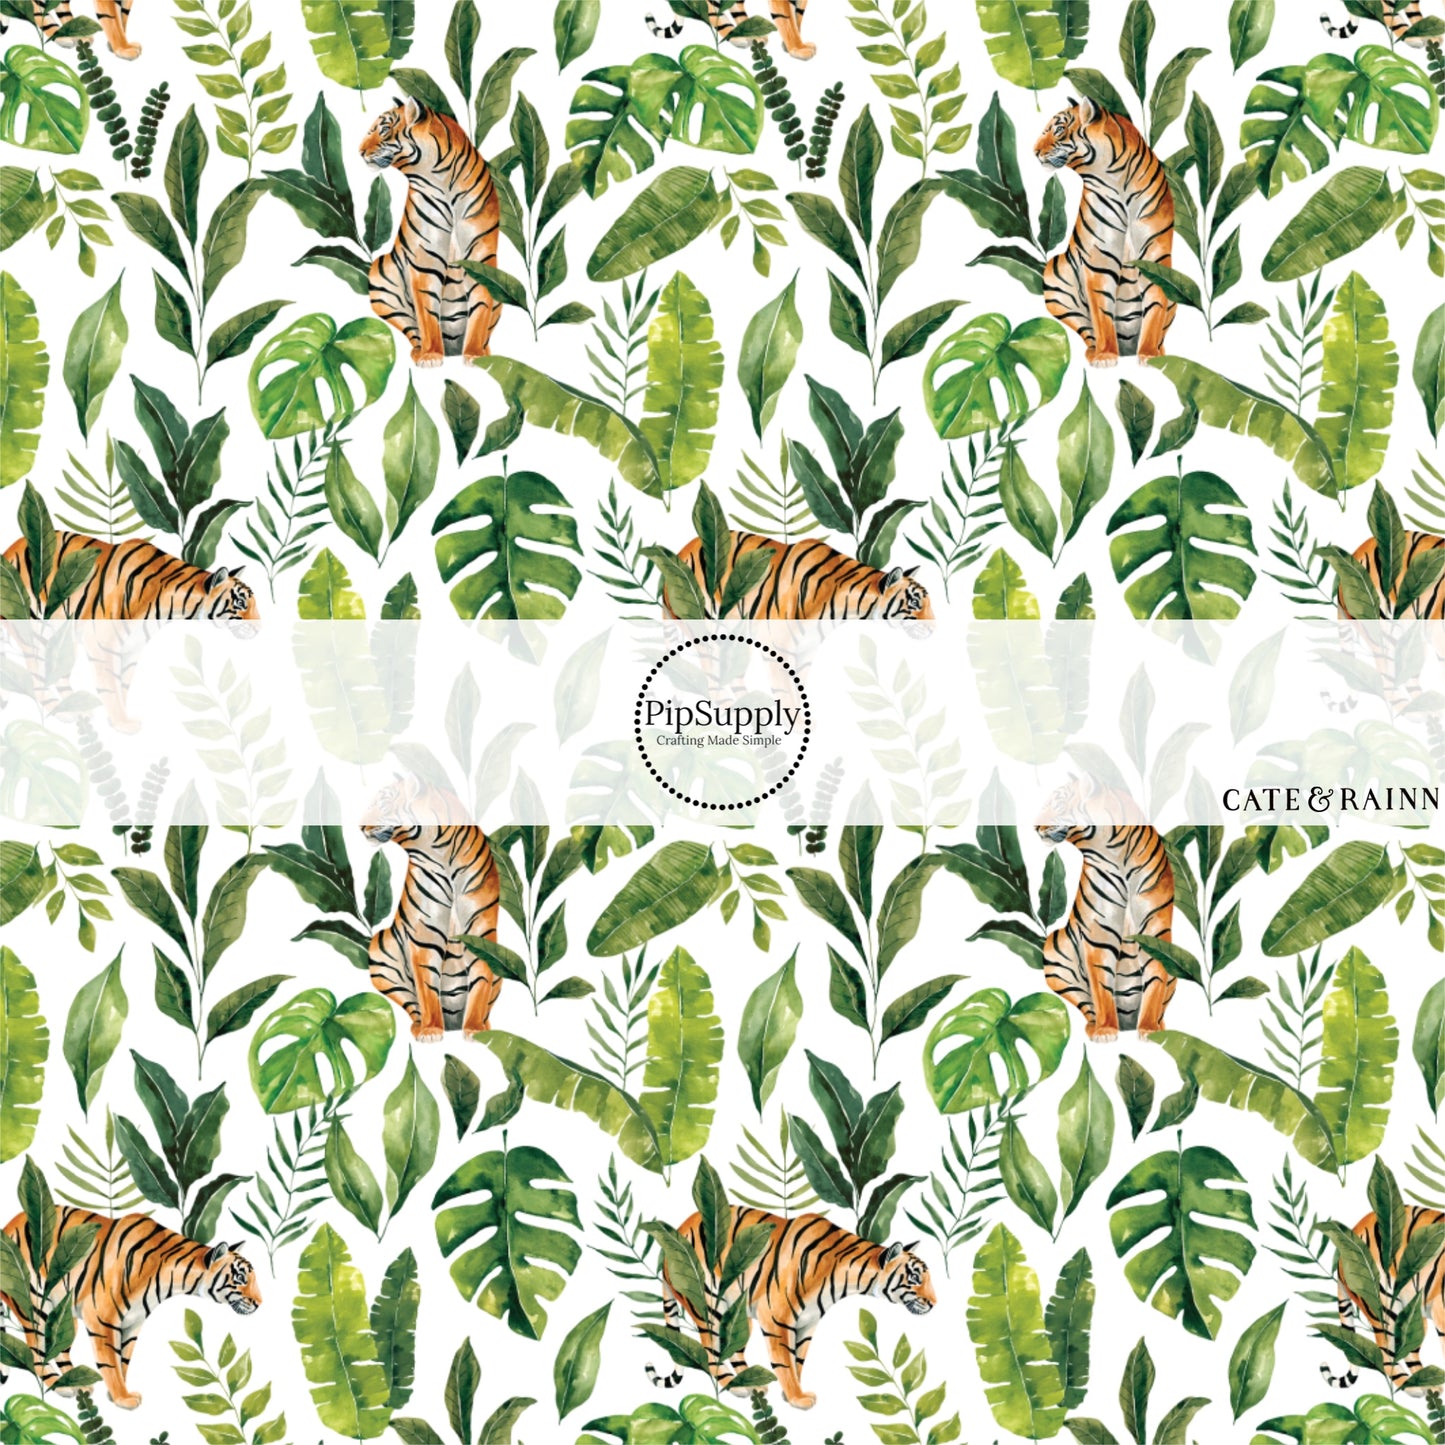 These jungle pattern faux leather sheets contain the following design elements: tropical jungle tigers. Our CPSIA compliant faux leather sheets or rolls can be used for all types of crafting projects.